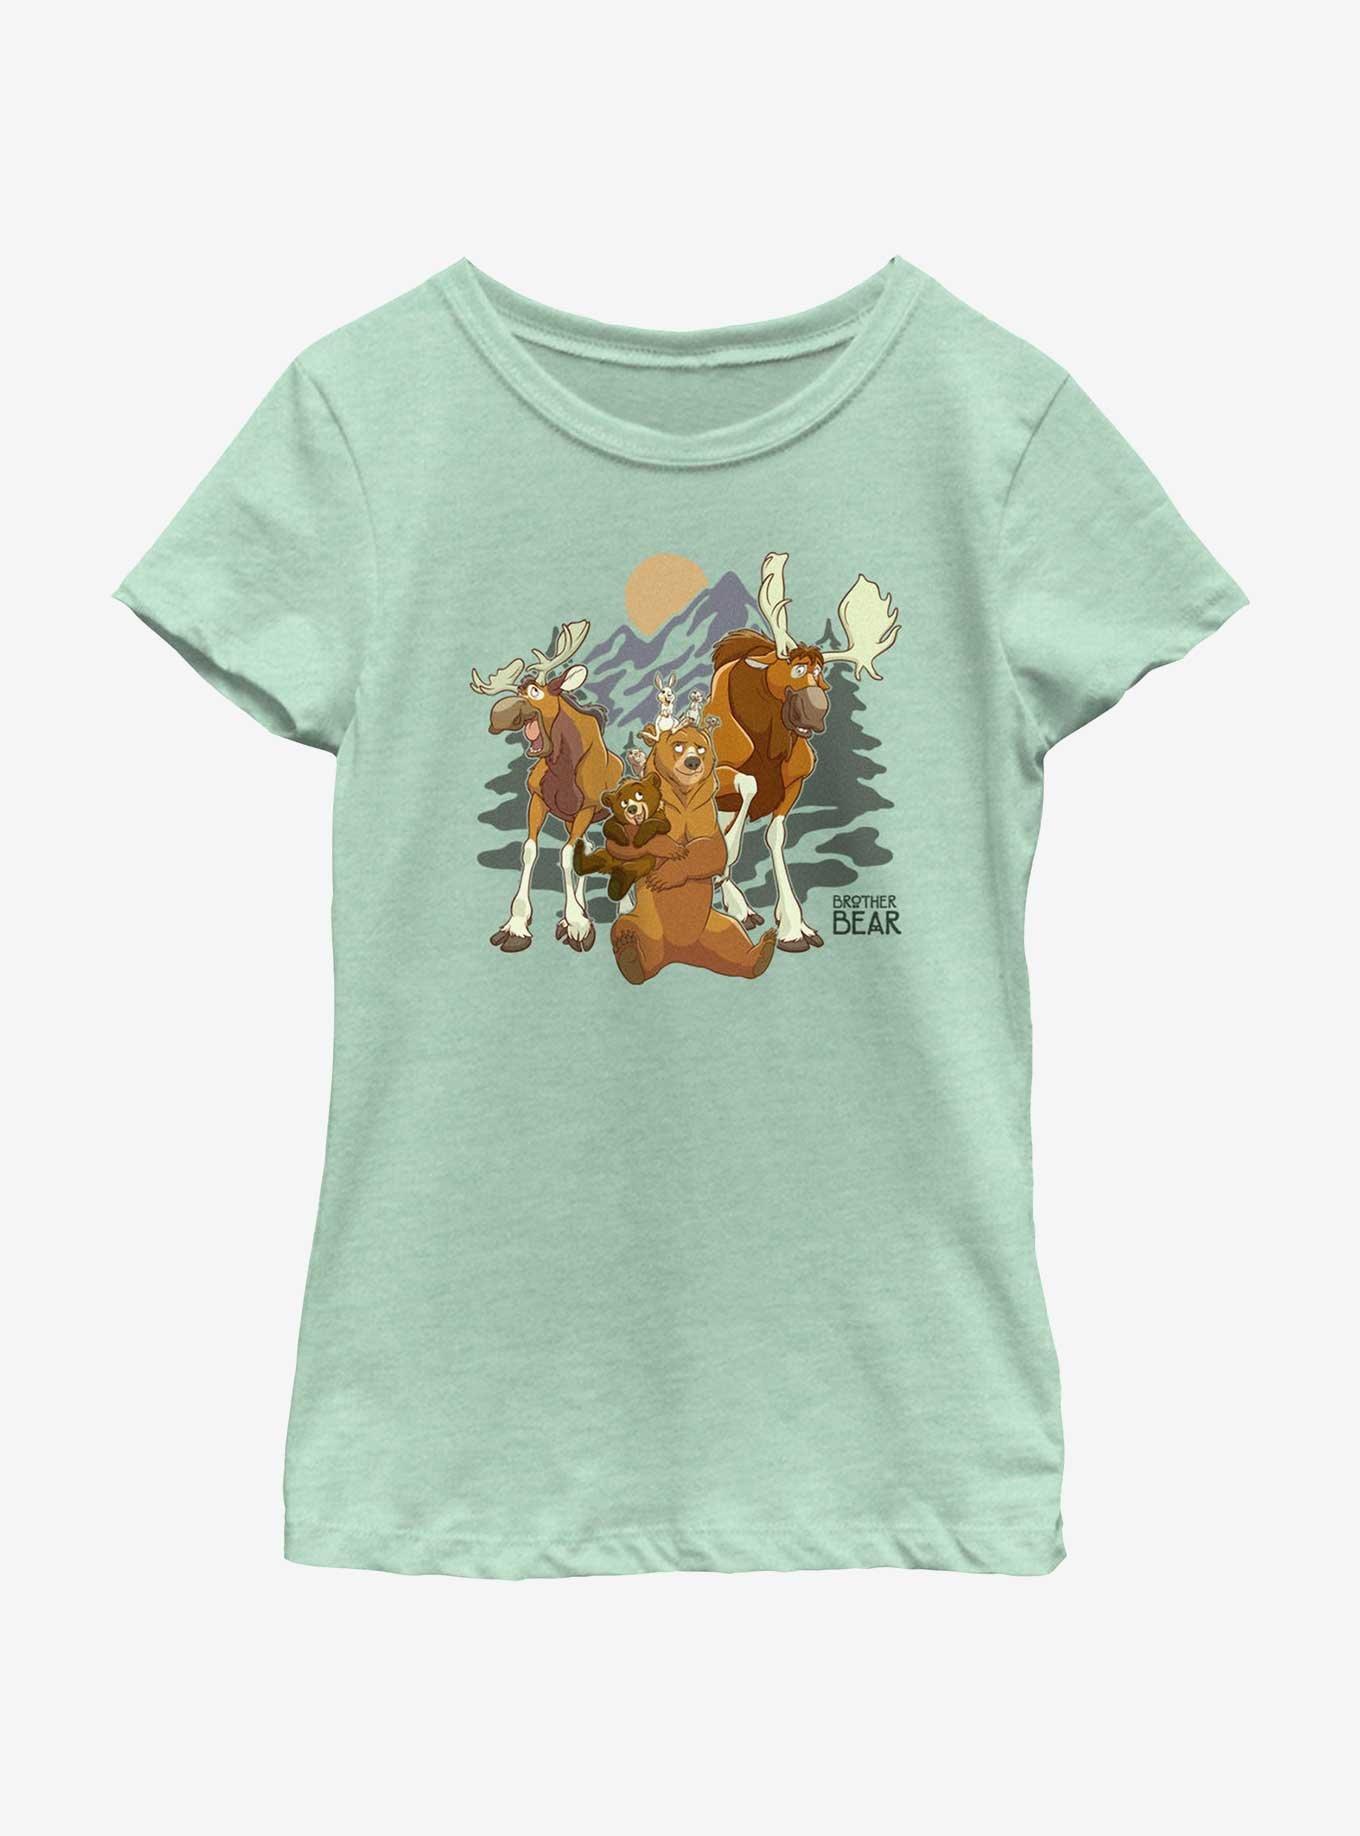 Disney Brother Bear Rutt and Tuke Moose Brothers Youth Girls T-Shirt, MINT, hi-res